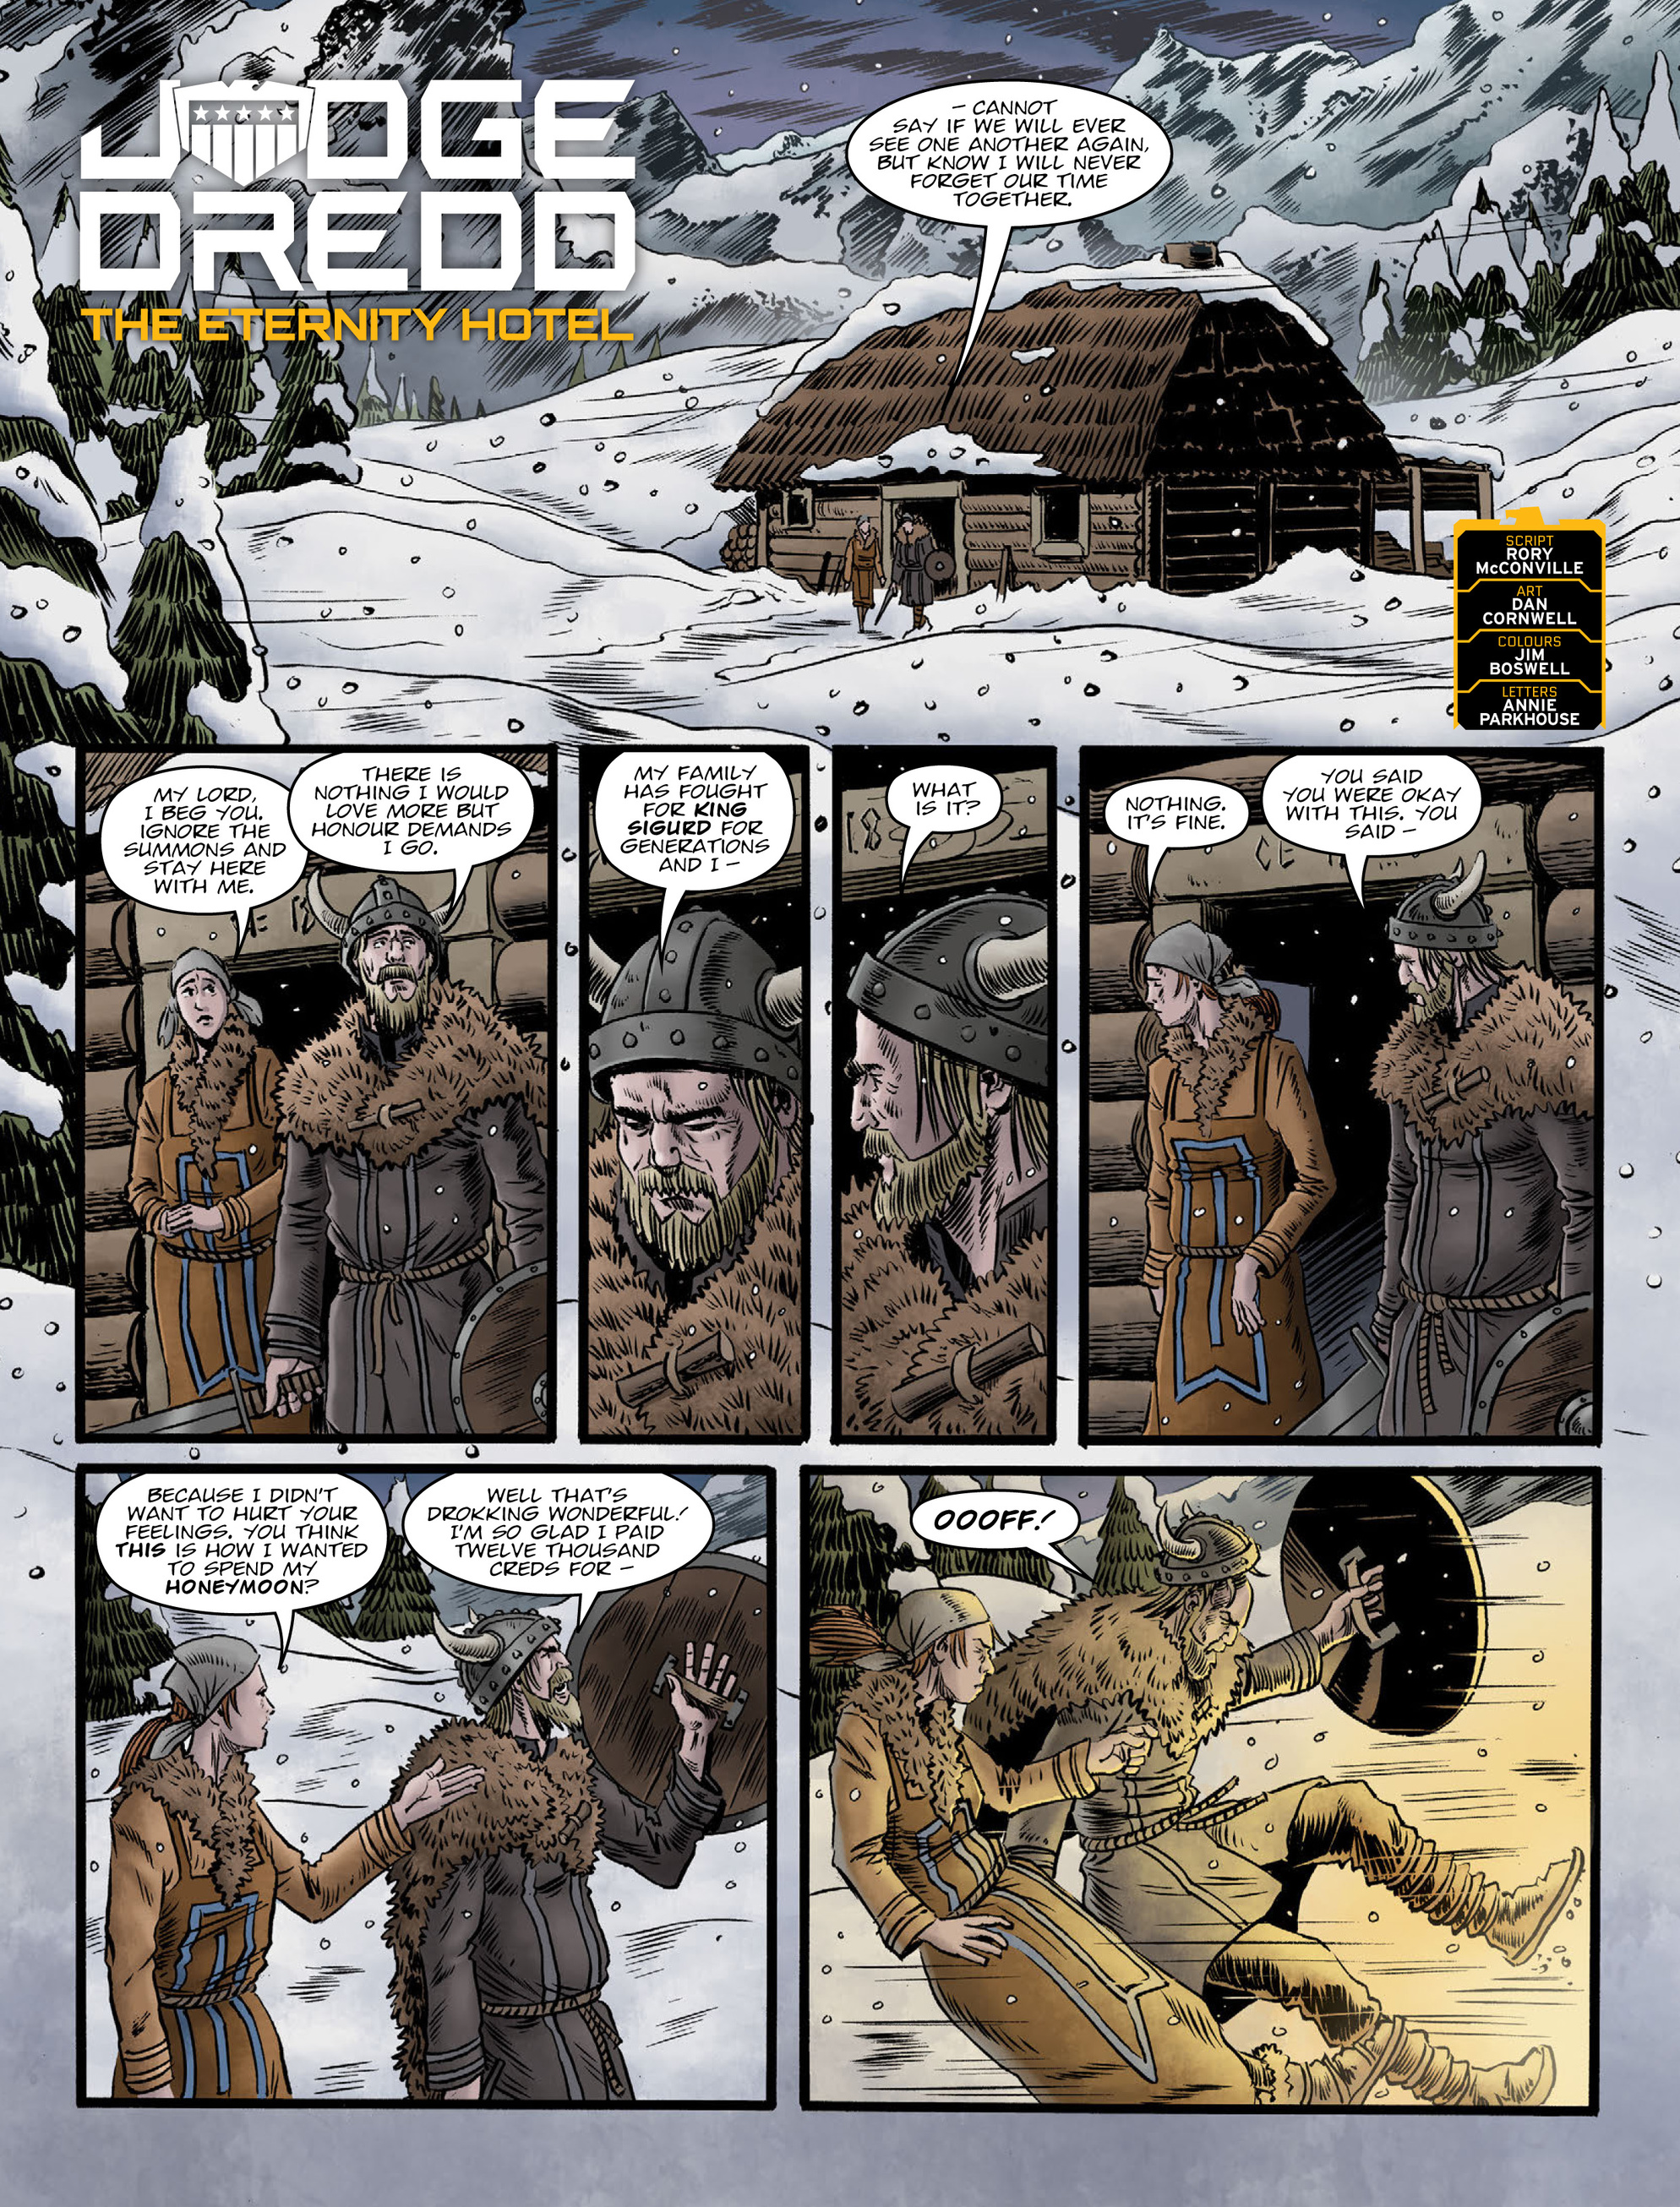 2000 AD: Chapter 2112 - Page 3